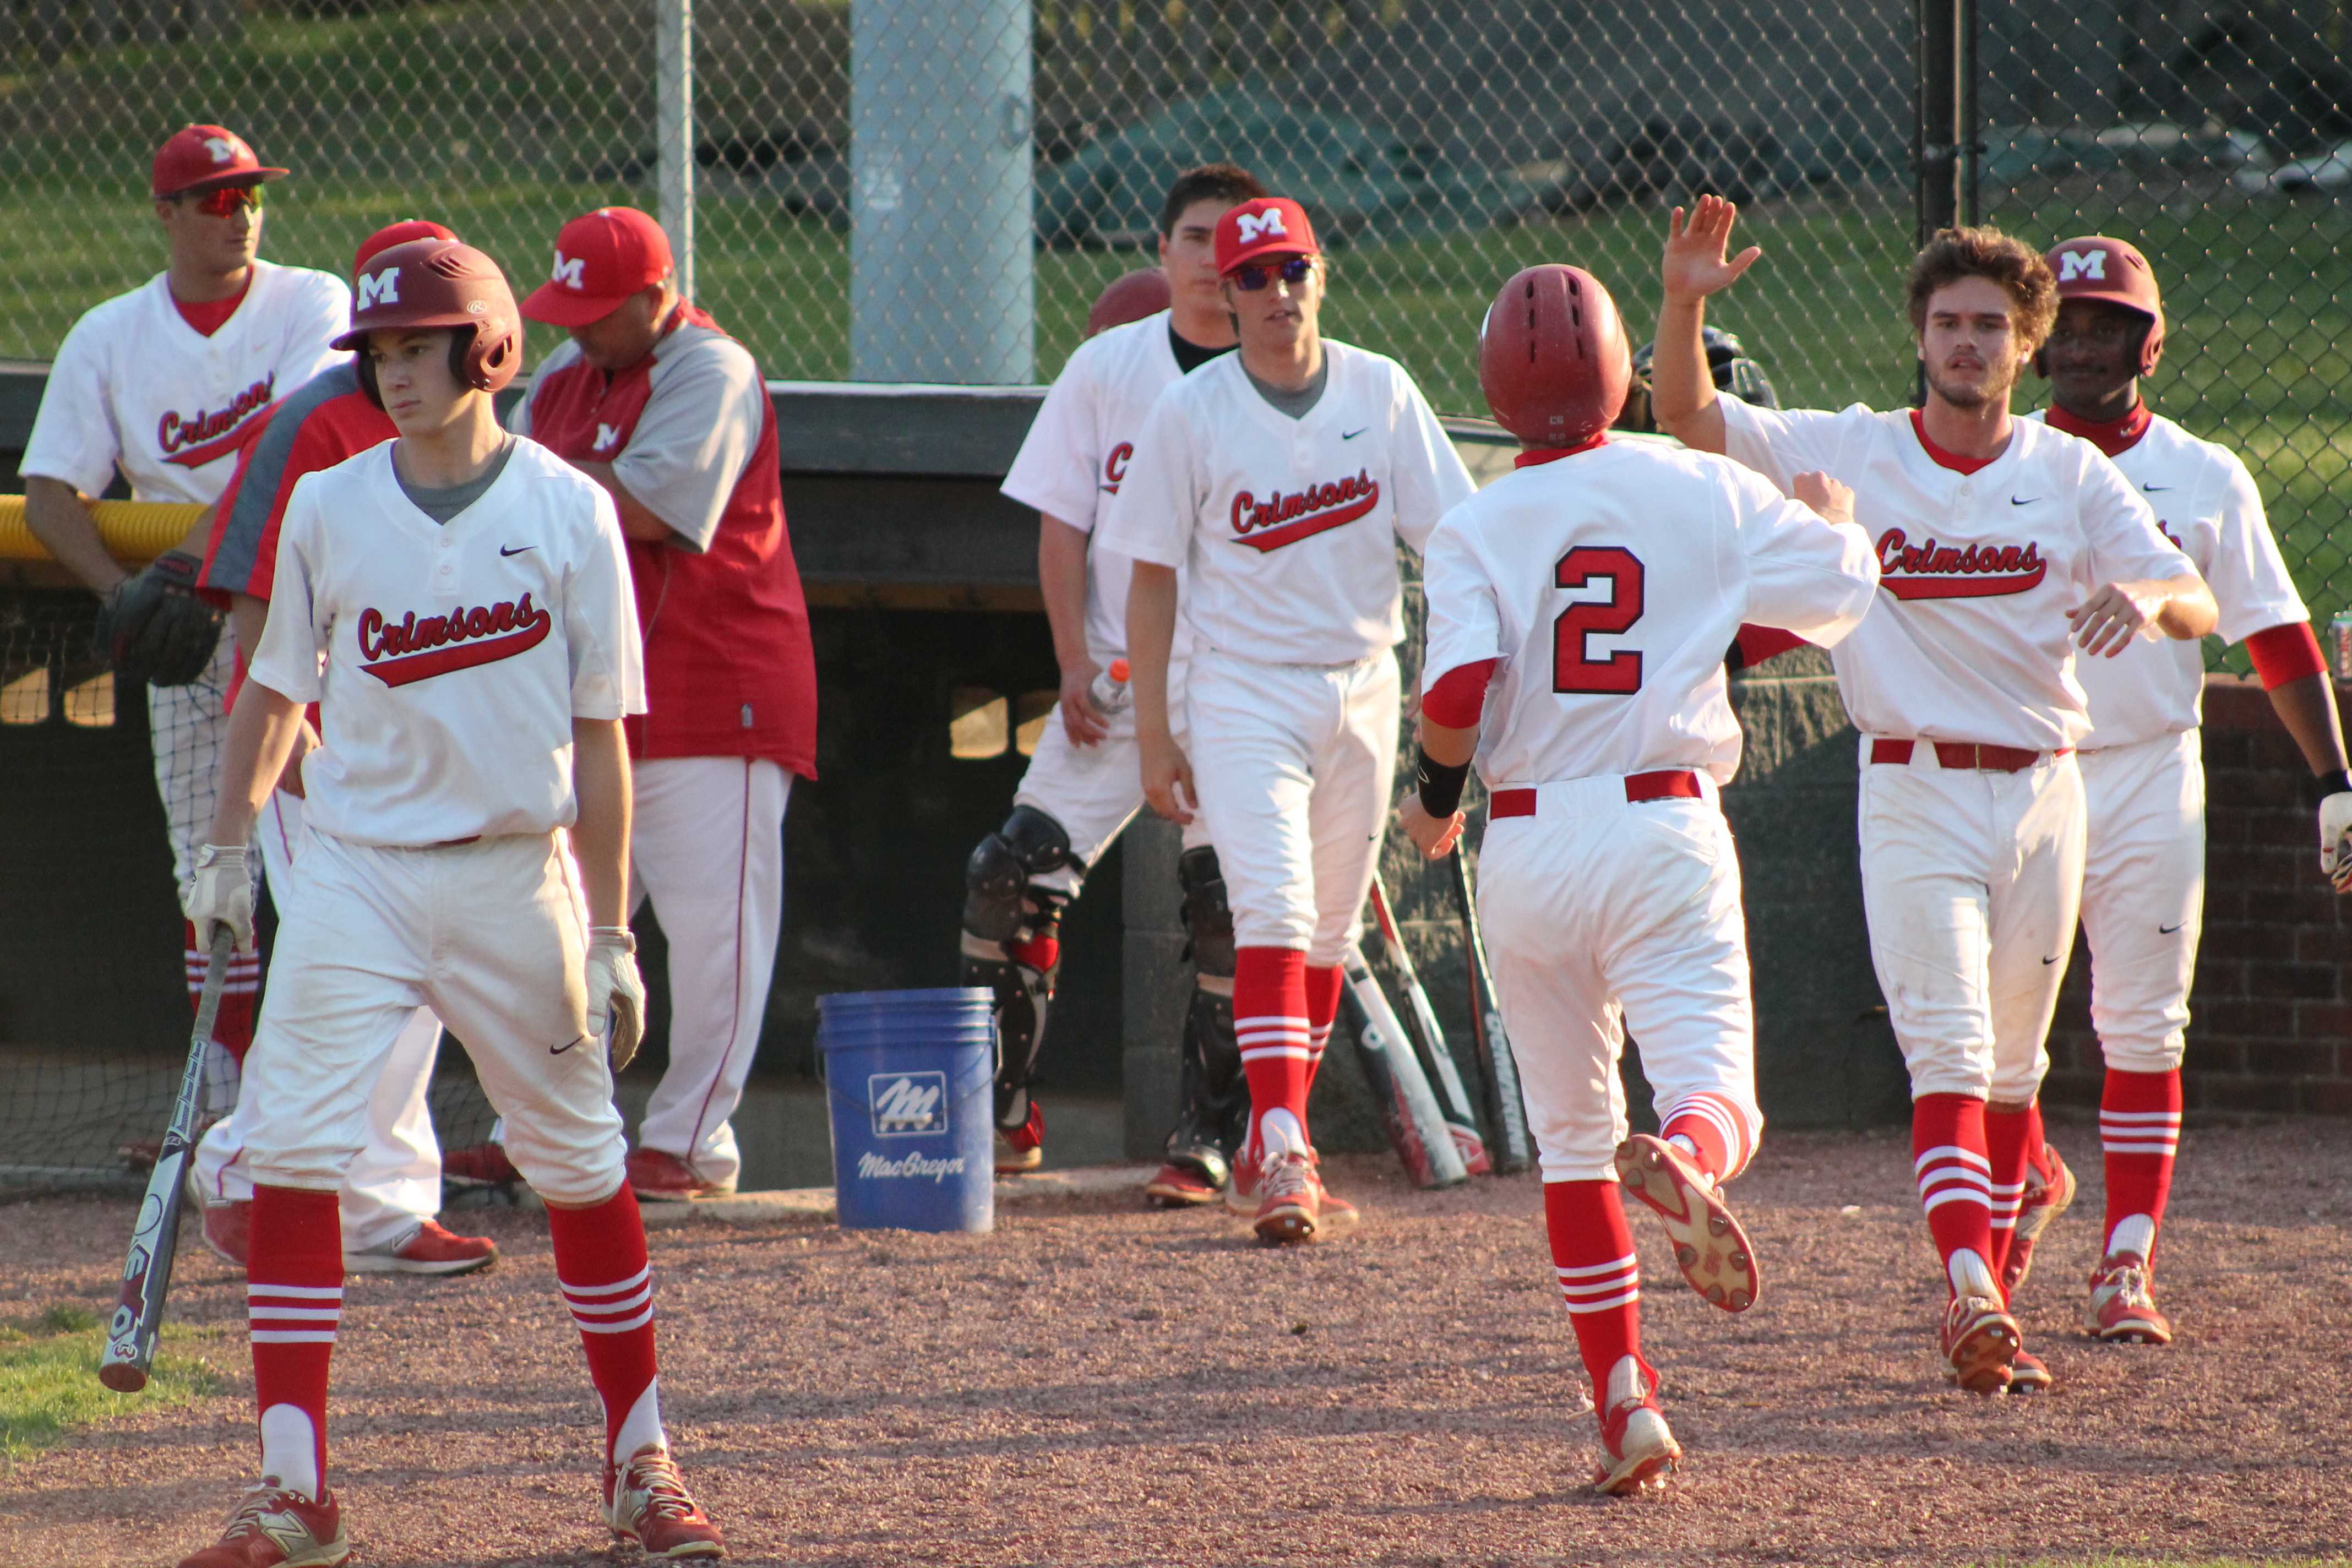 Matt Olson (11, #2) celebrates with Matthew Marino (12, #7) and others after scoring Manuals first run of the game off of a hit by Aaron Sary (9, #20).